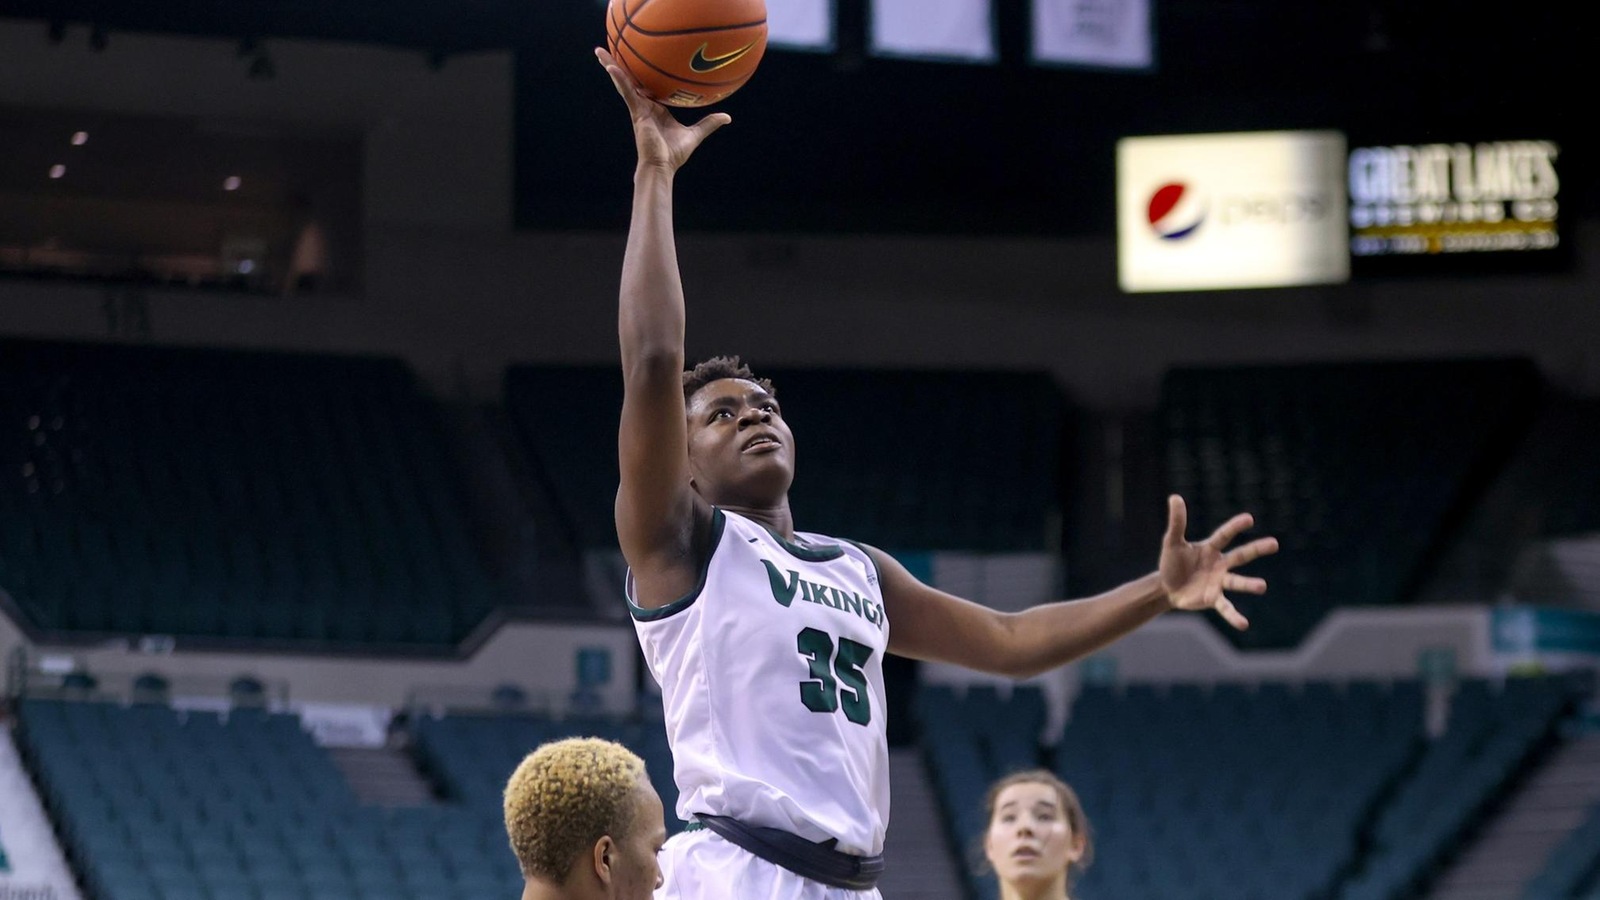 Cleveland State Women’s Basketball Earns 59-56 Victory Over NKU